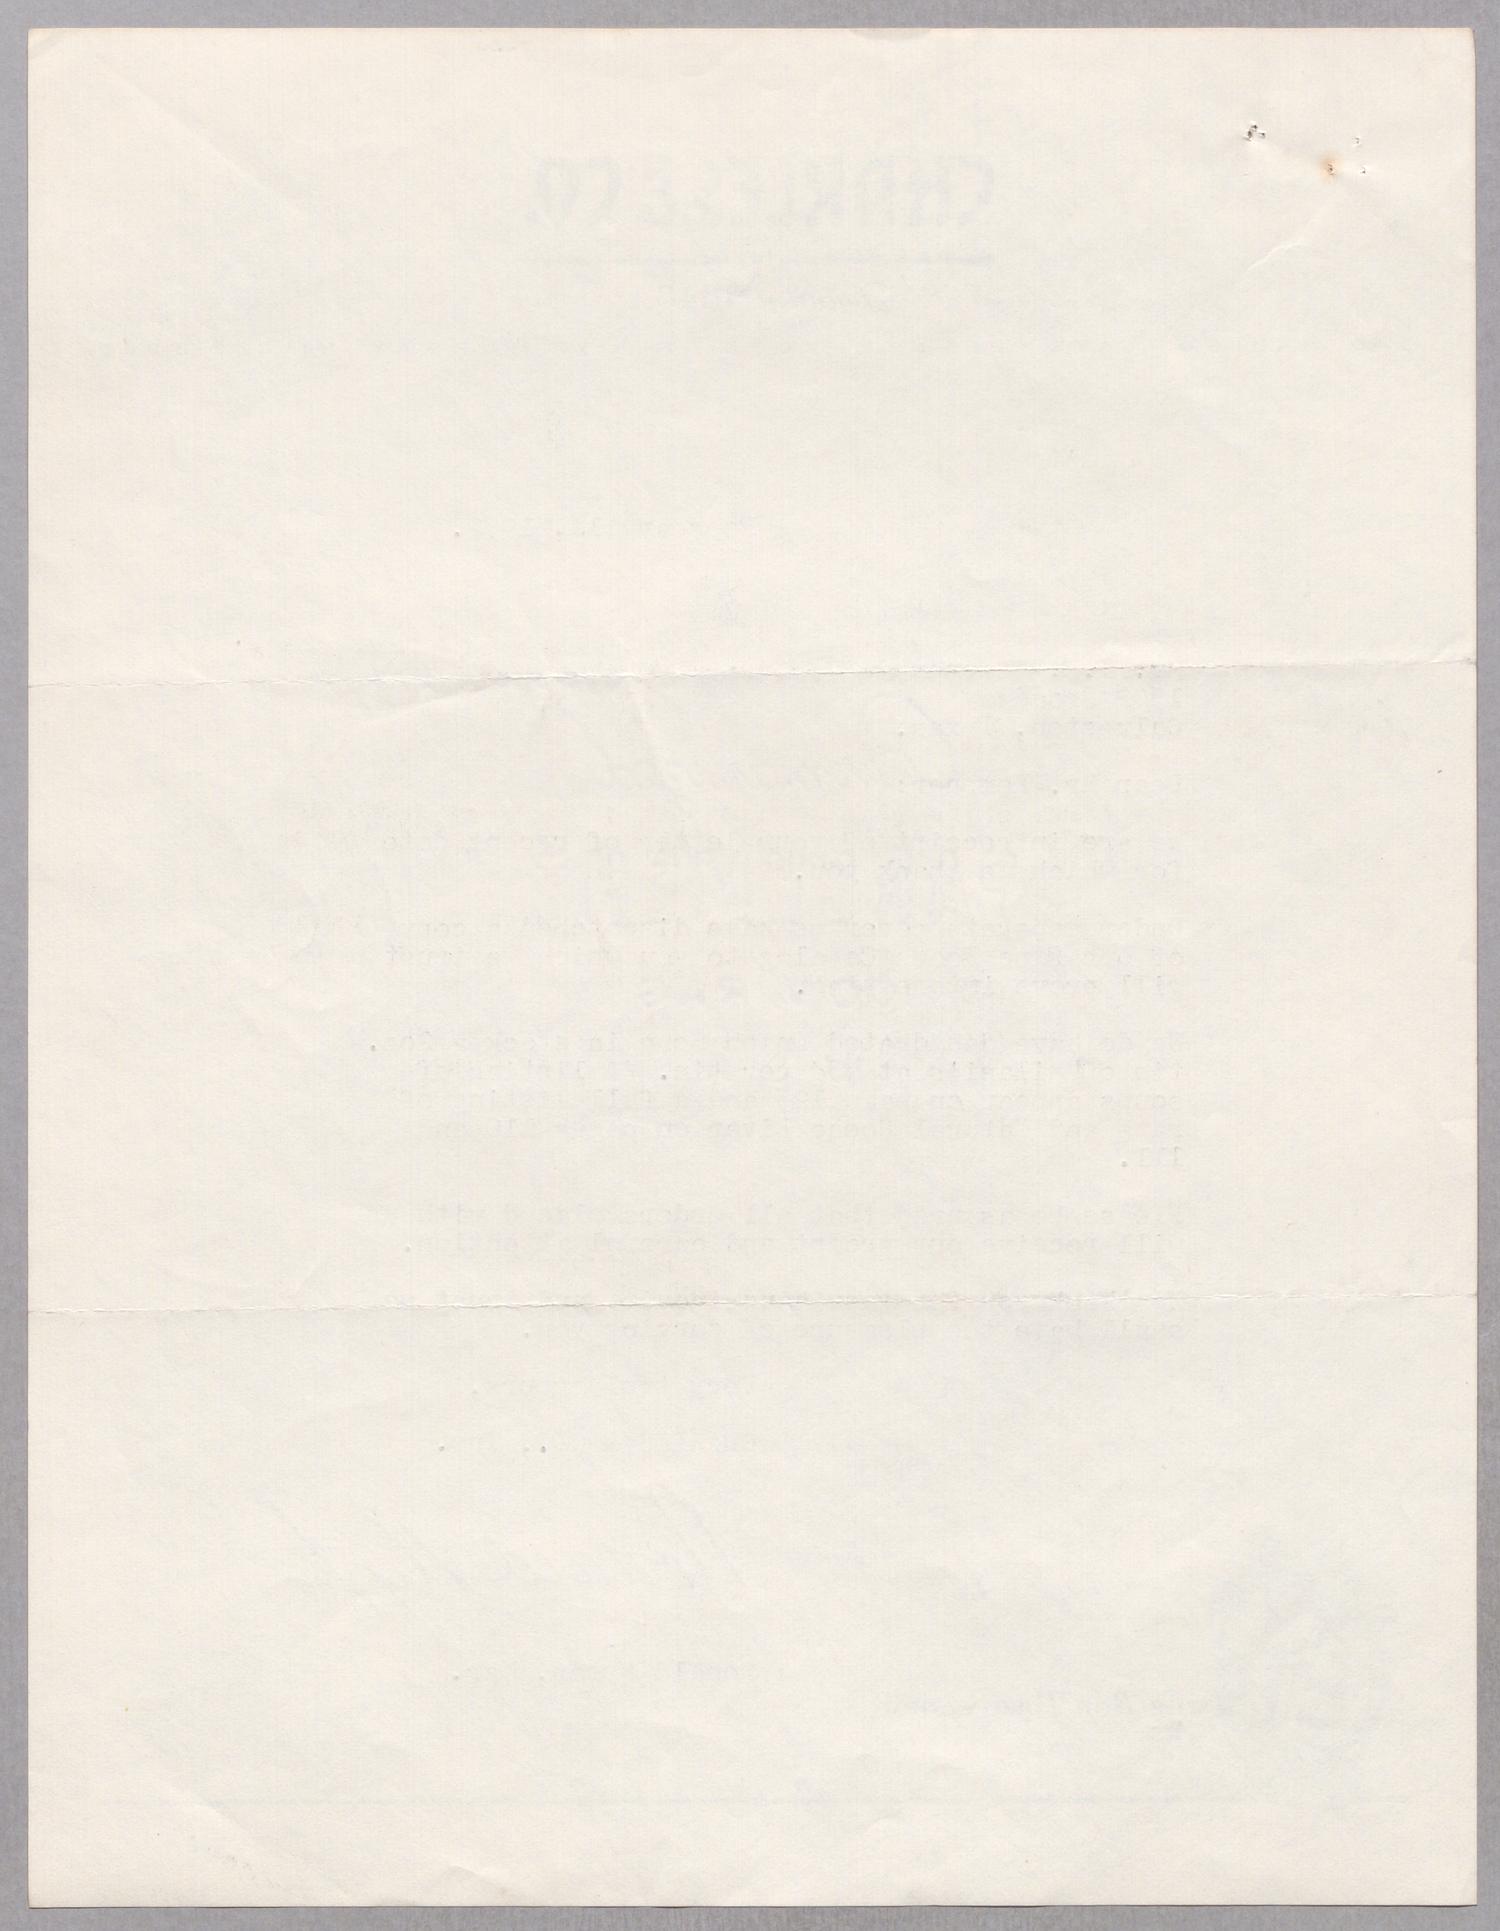 [Letter from Charles & Company to I. H. Kempner, February 12, 1952]
                                                
                                                    [Sequence #]: 2 of 2
                                                